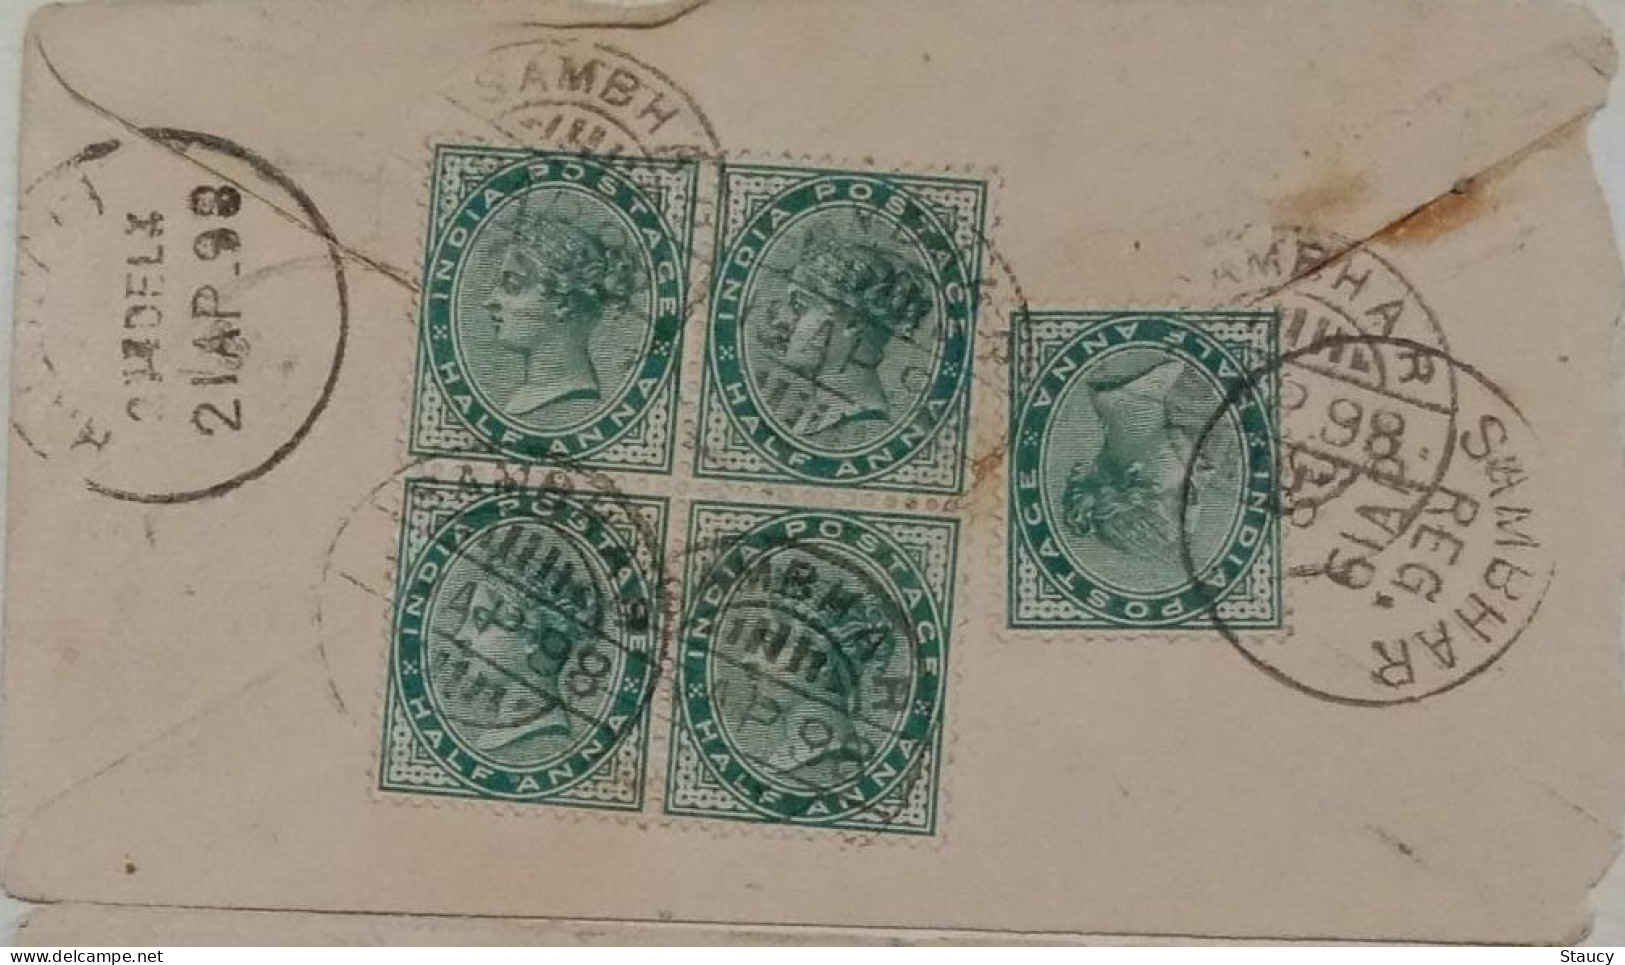 BRITISH INDIA 1898 QV 5 X 1/2a FRANKING On Registered QV Stationery COVER, NICE CANC ON FRONT & BACK, RARE As Per Scan - Jaipur